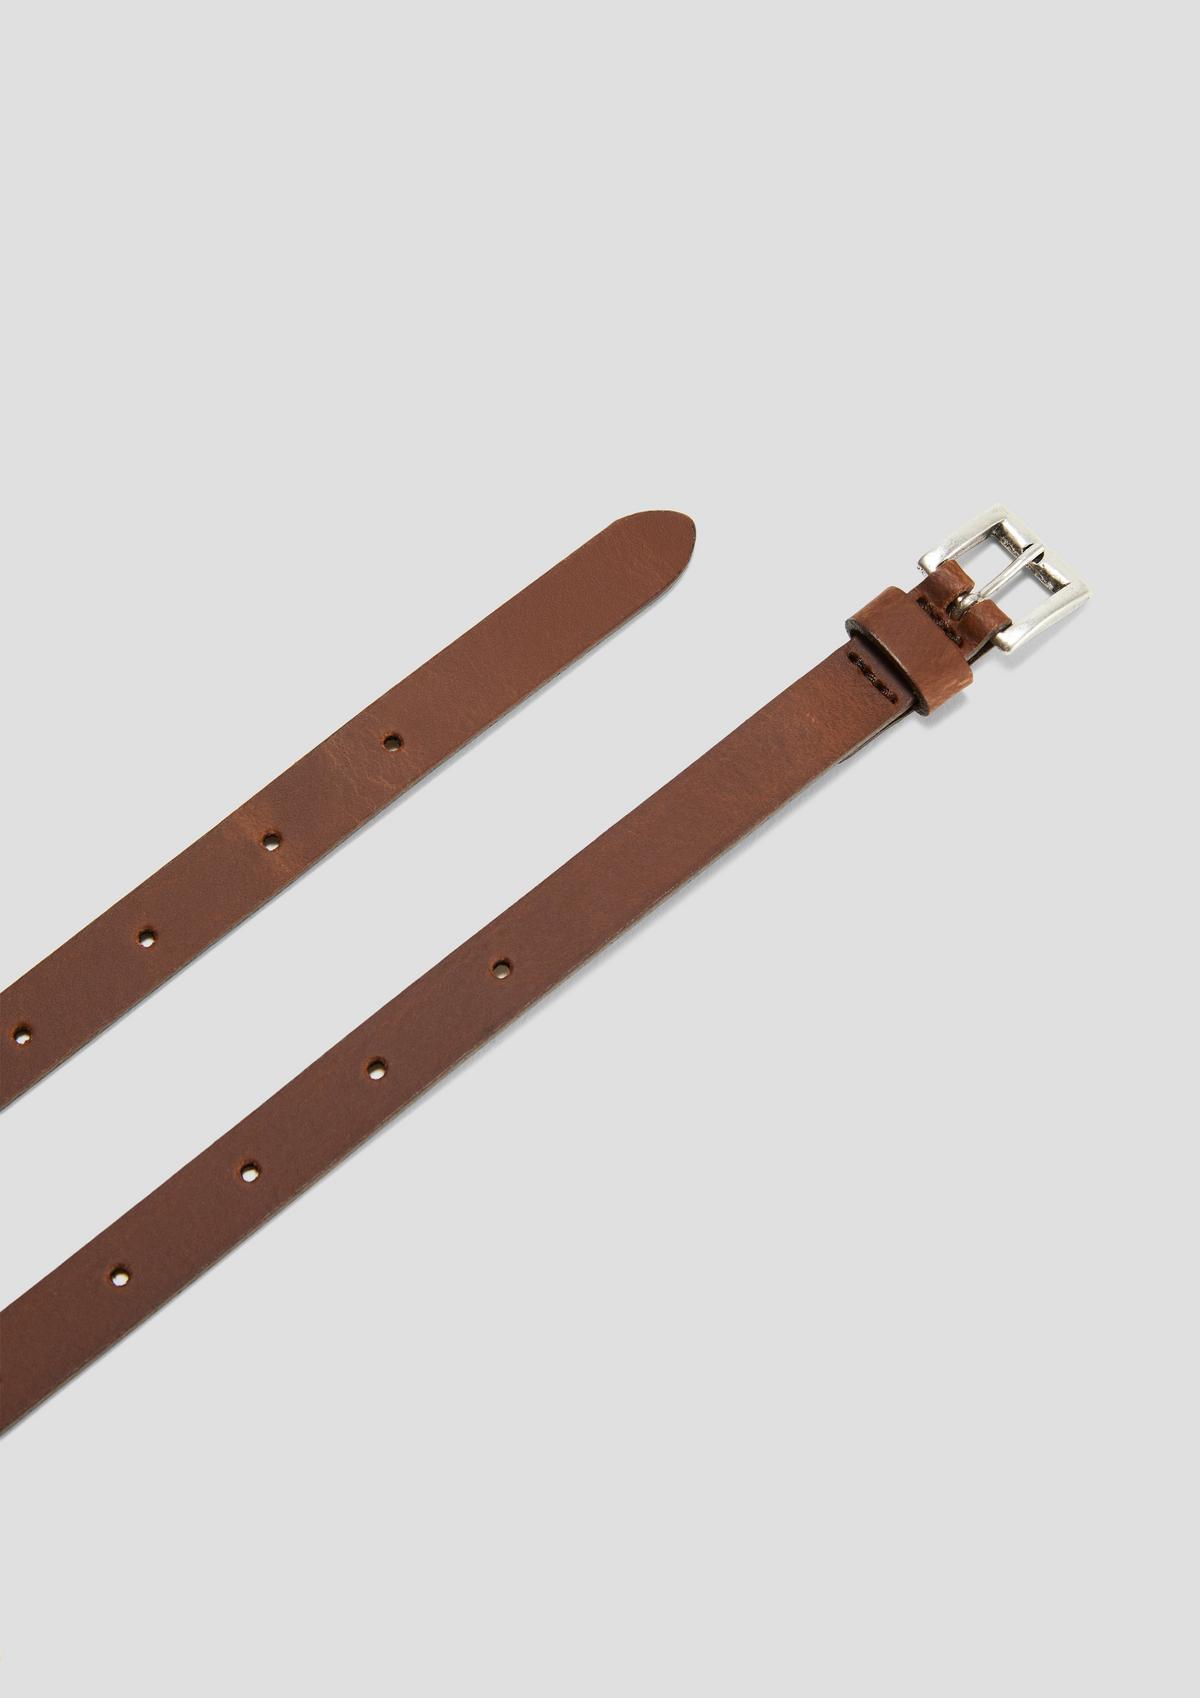 s.Oliver Leather belt with a pin buckle